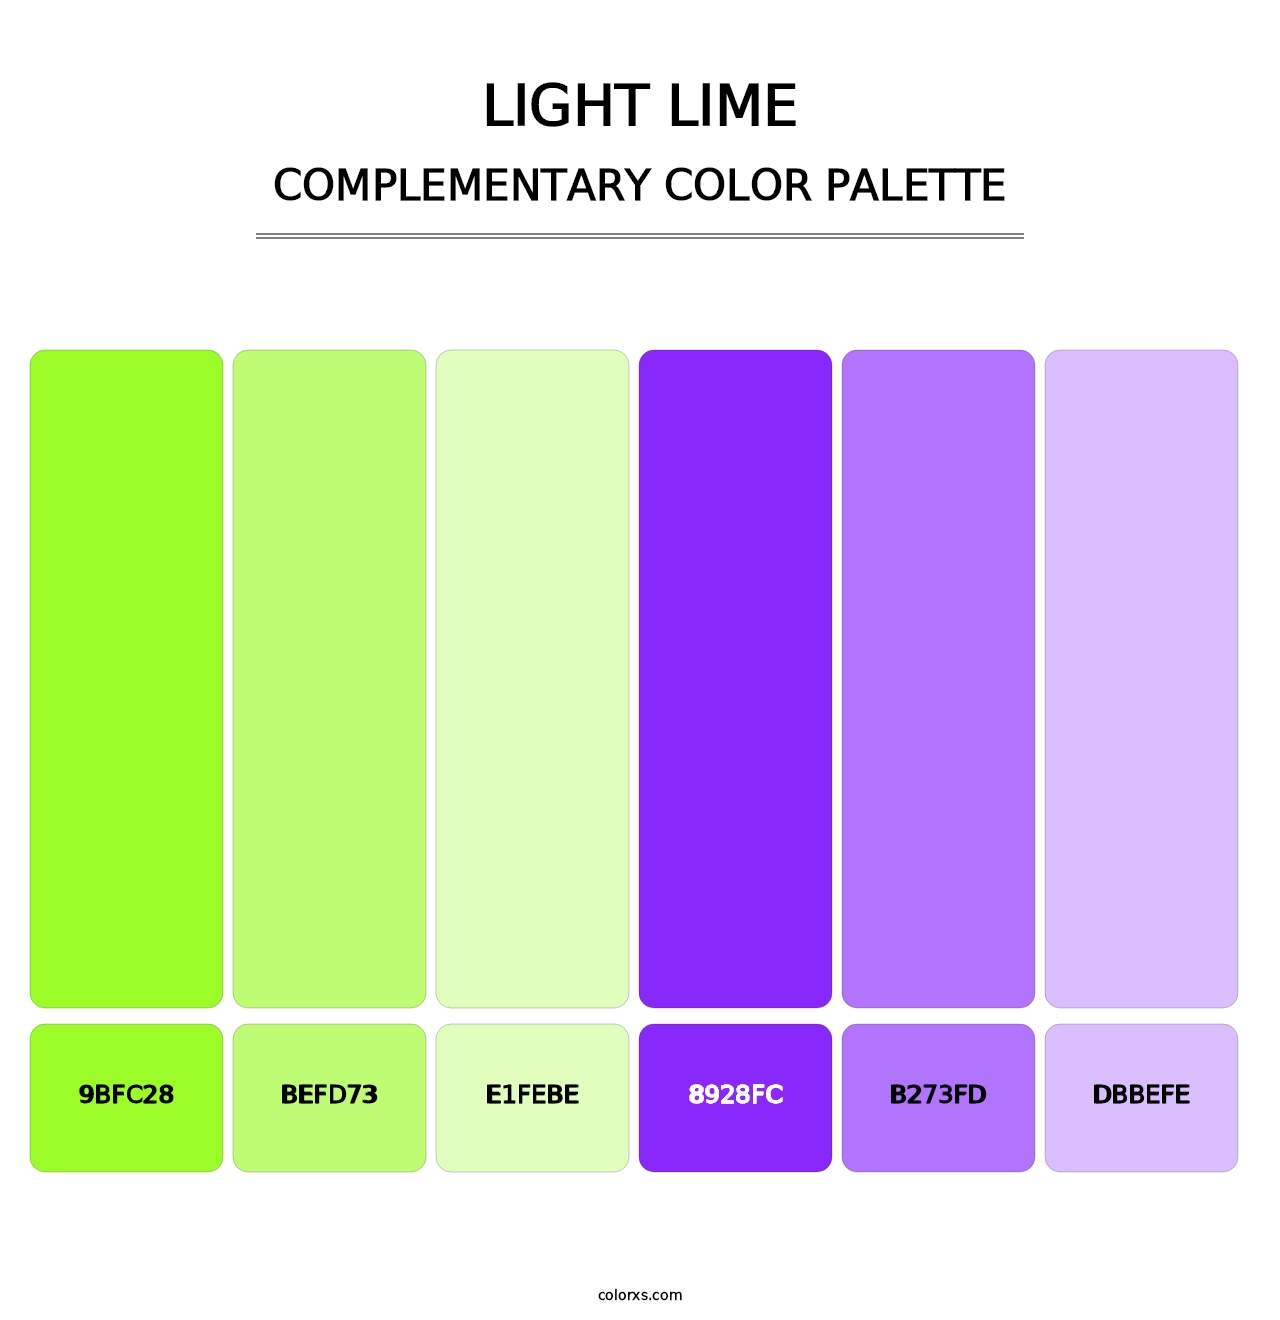 Light Lime - Complementary Color Palette